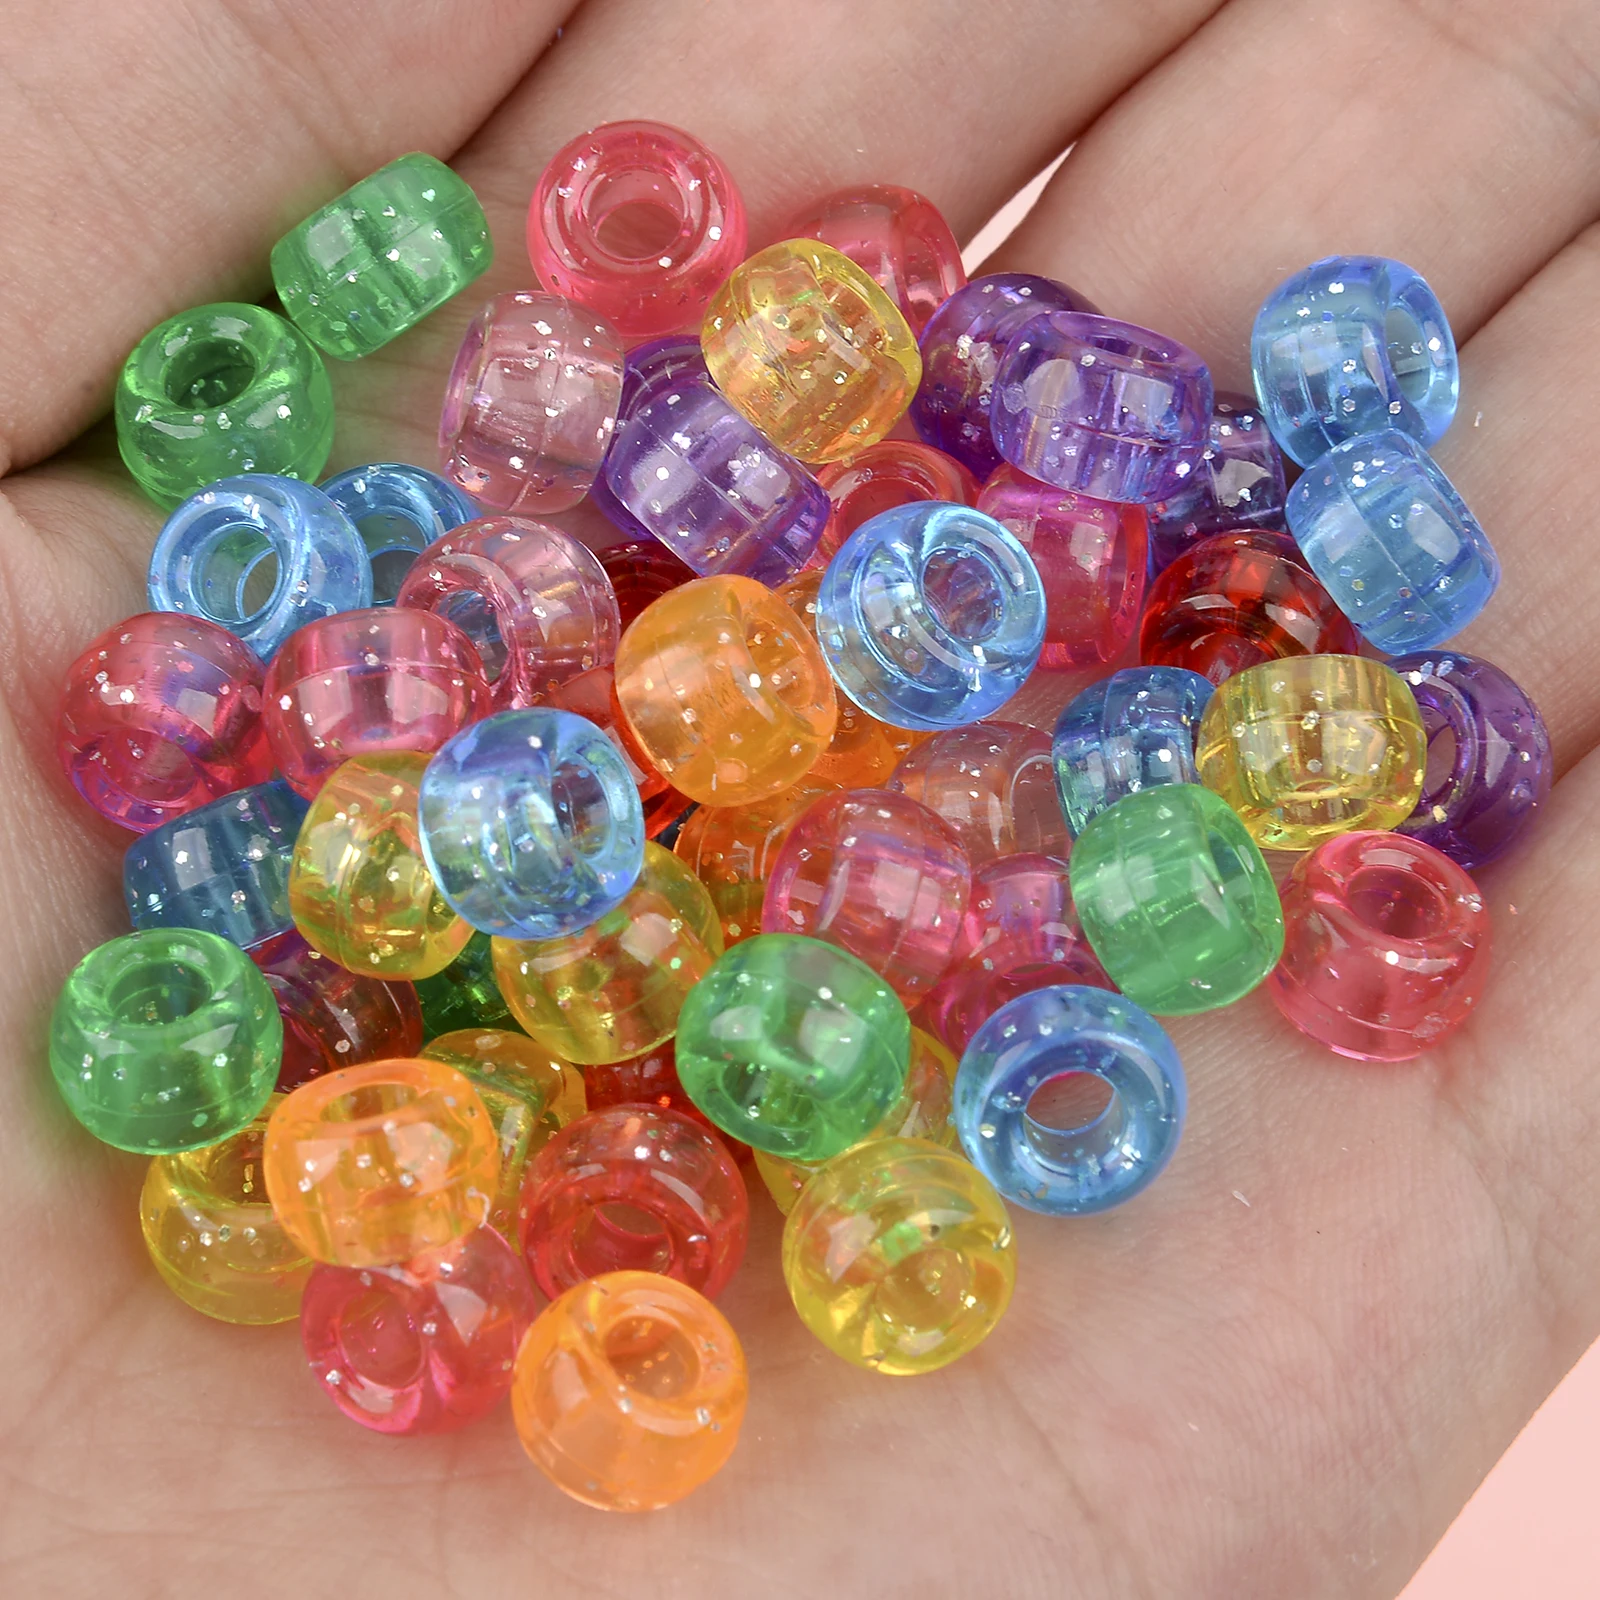 50-200Pcs 6x9mm Big Hole African Hair Beads Candy Acrylic Beads Loose Beads  For Jewelry Making Bracelet Necklace Diy Accessories - AliExpress